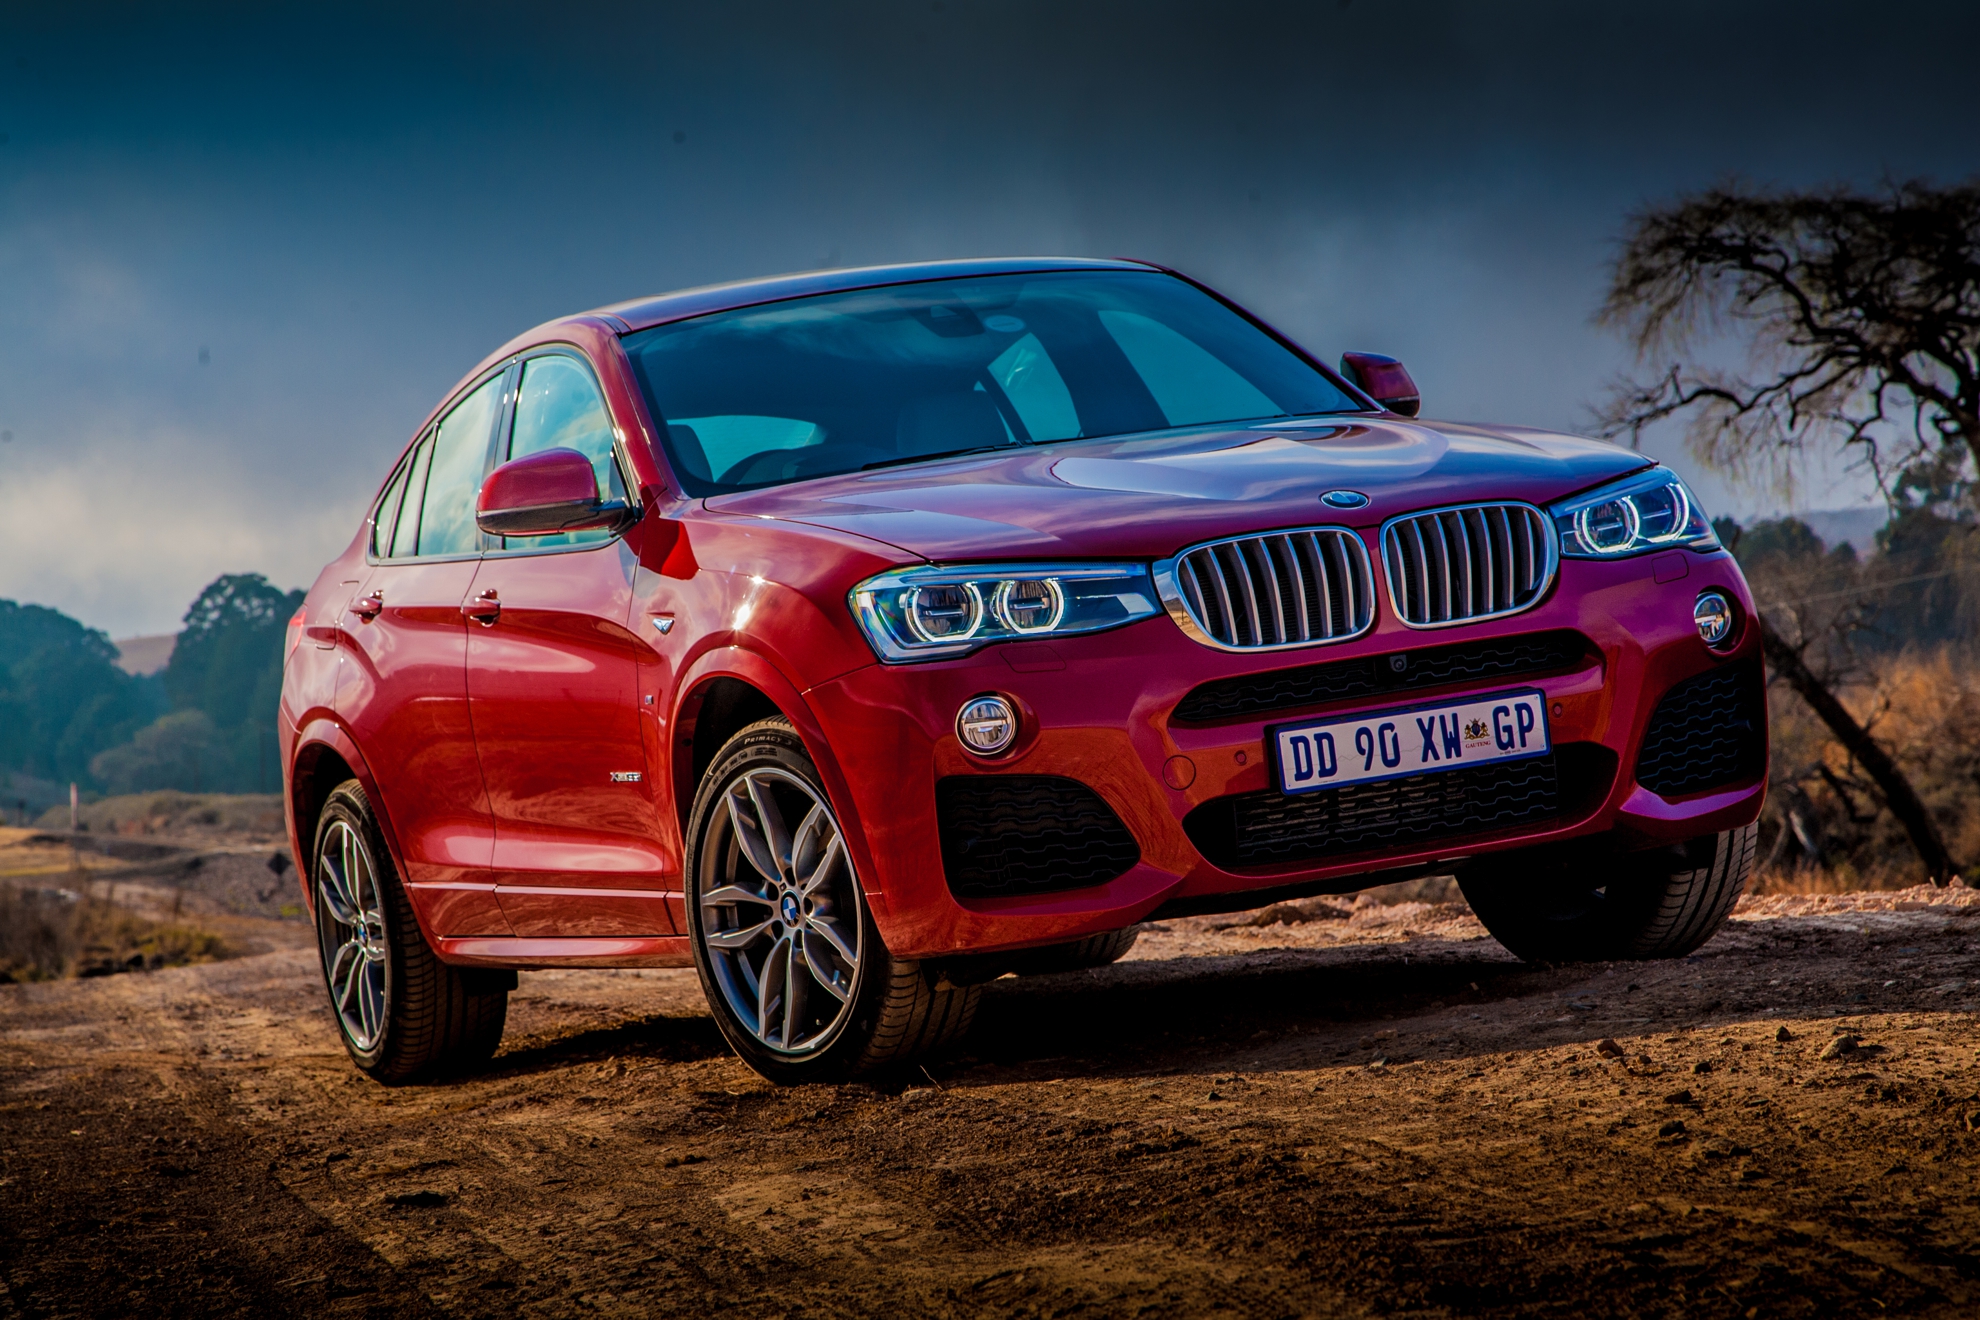 BMW once again South Africa’s top selling luxury car brand for the fifth consecutive year